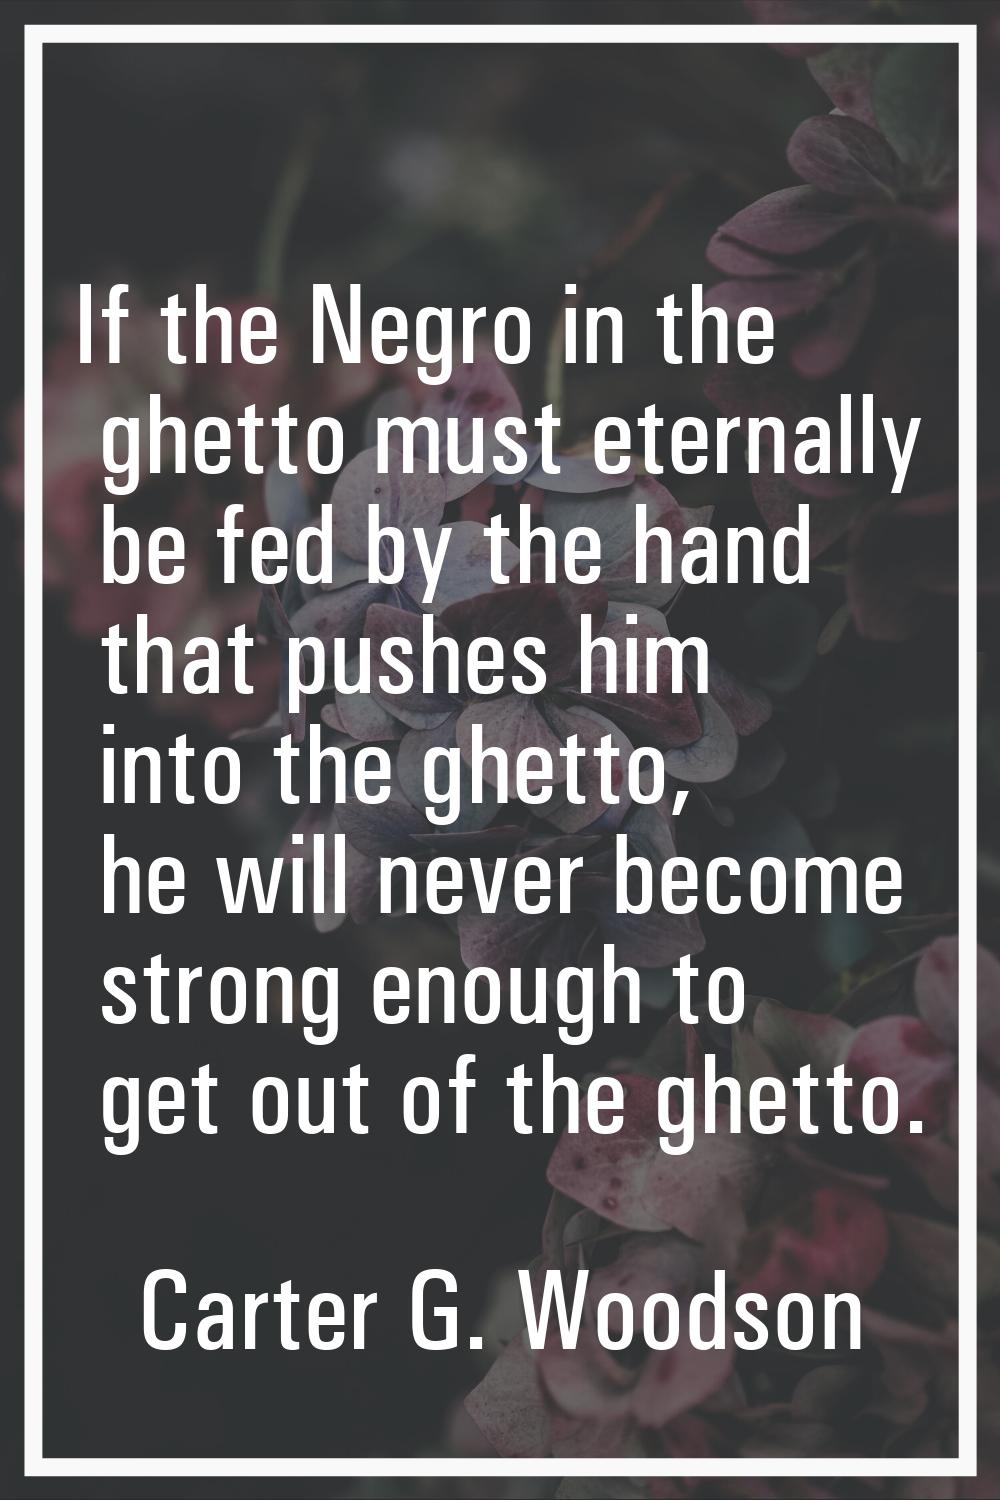 If the Negro in the ghetto must eternally be fed by the hand that pushes him into the ghetto, he wi